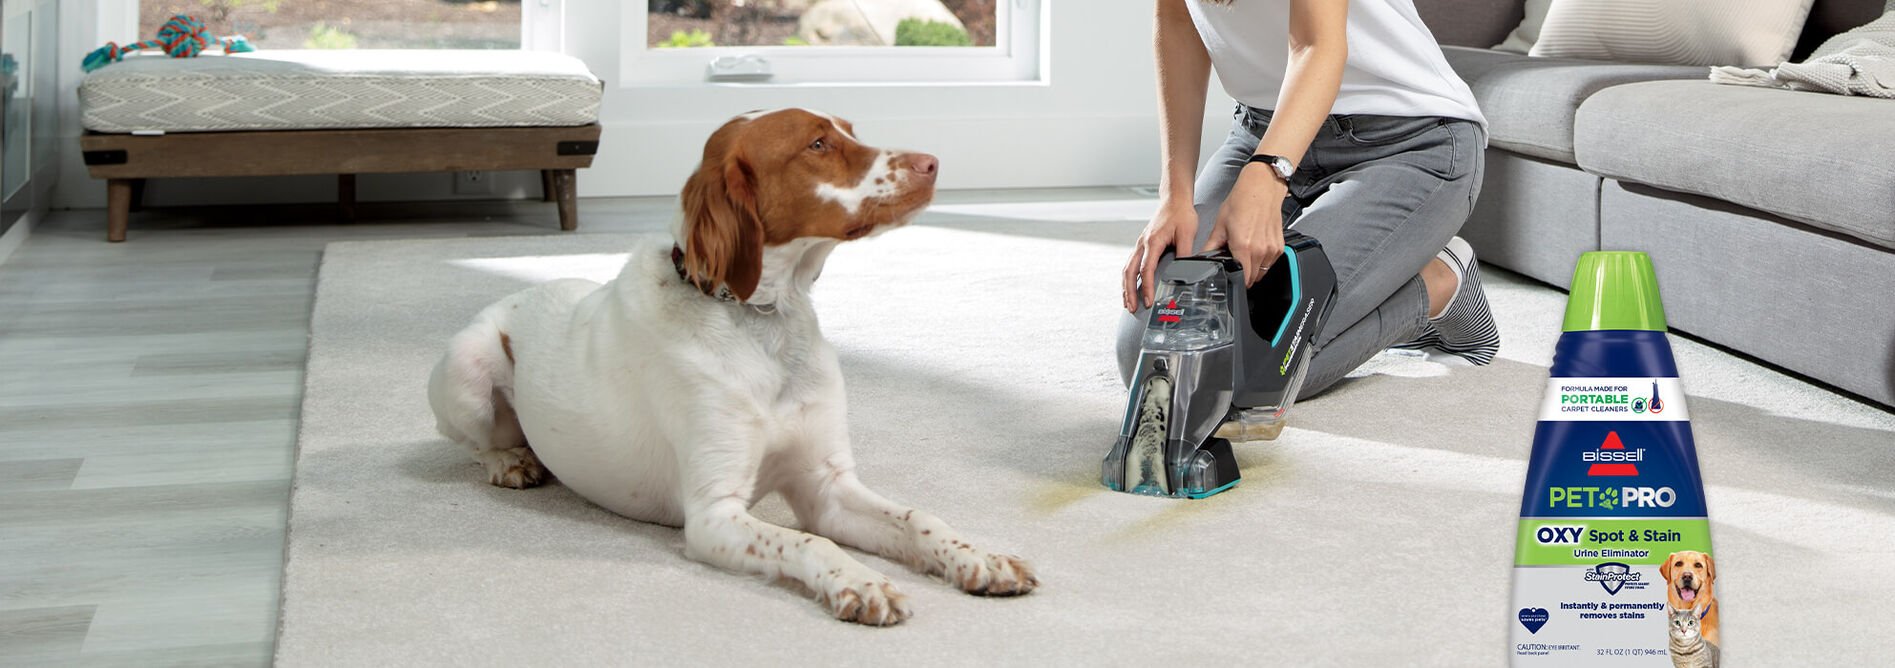 REVIEW BISSELL Spot Clean ProHeat Pet Portable Carpet Cleaner 2513W 